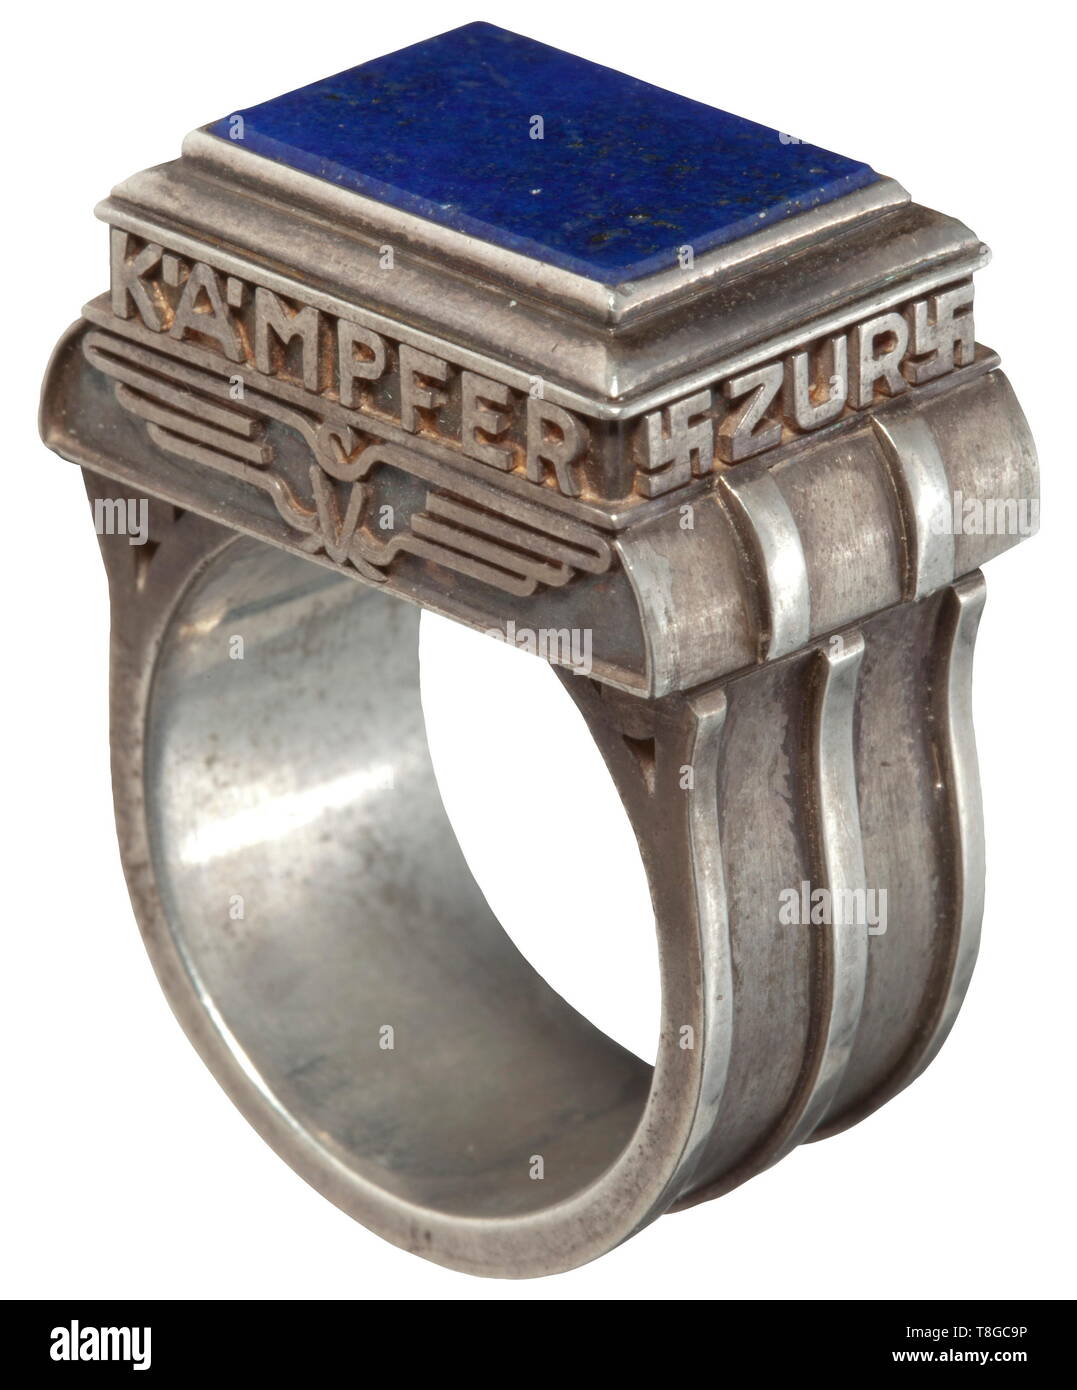 A Personal Gauleiter ring of Friedrich-Karl Florian Heavy, solid silver ring with the relief inscription "Dem Kämpfer zur Ehrung" between swastikas around a lapis lazuli gem, behind it a national eagle (swastika in its claws not visible). Goldsmith work of high quality. With a brown paper packet bearing the typewritten inscription (tr.) "Contents: 1 Gauleiter ring, personally received from Adolf Hitler, given during his visit to Düsseldorf in October 1937" and handwritten pencil note "Für Ditha Fritz". historic, historical, 20th century, 1930s, NS, National Socialism, Nazis, Editorial-Use-Only Stock Photo